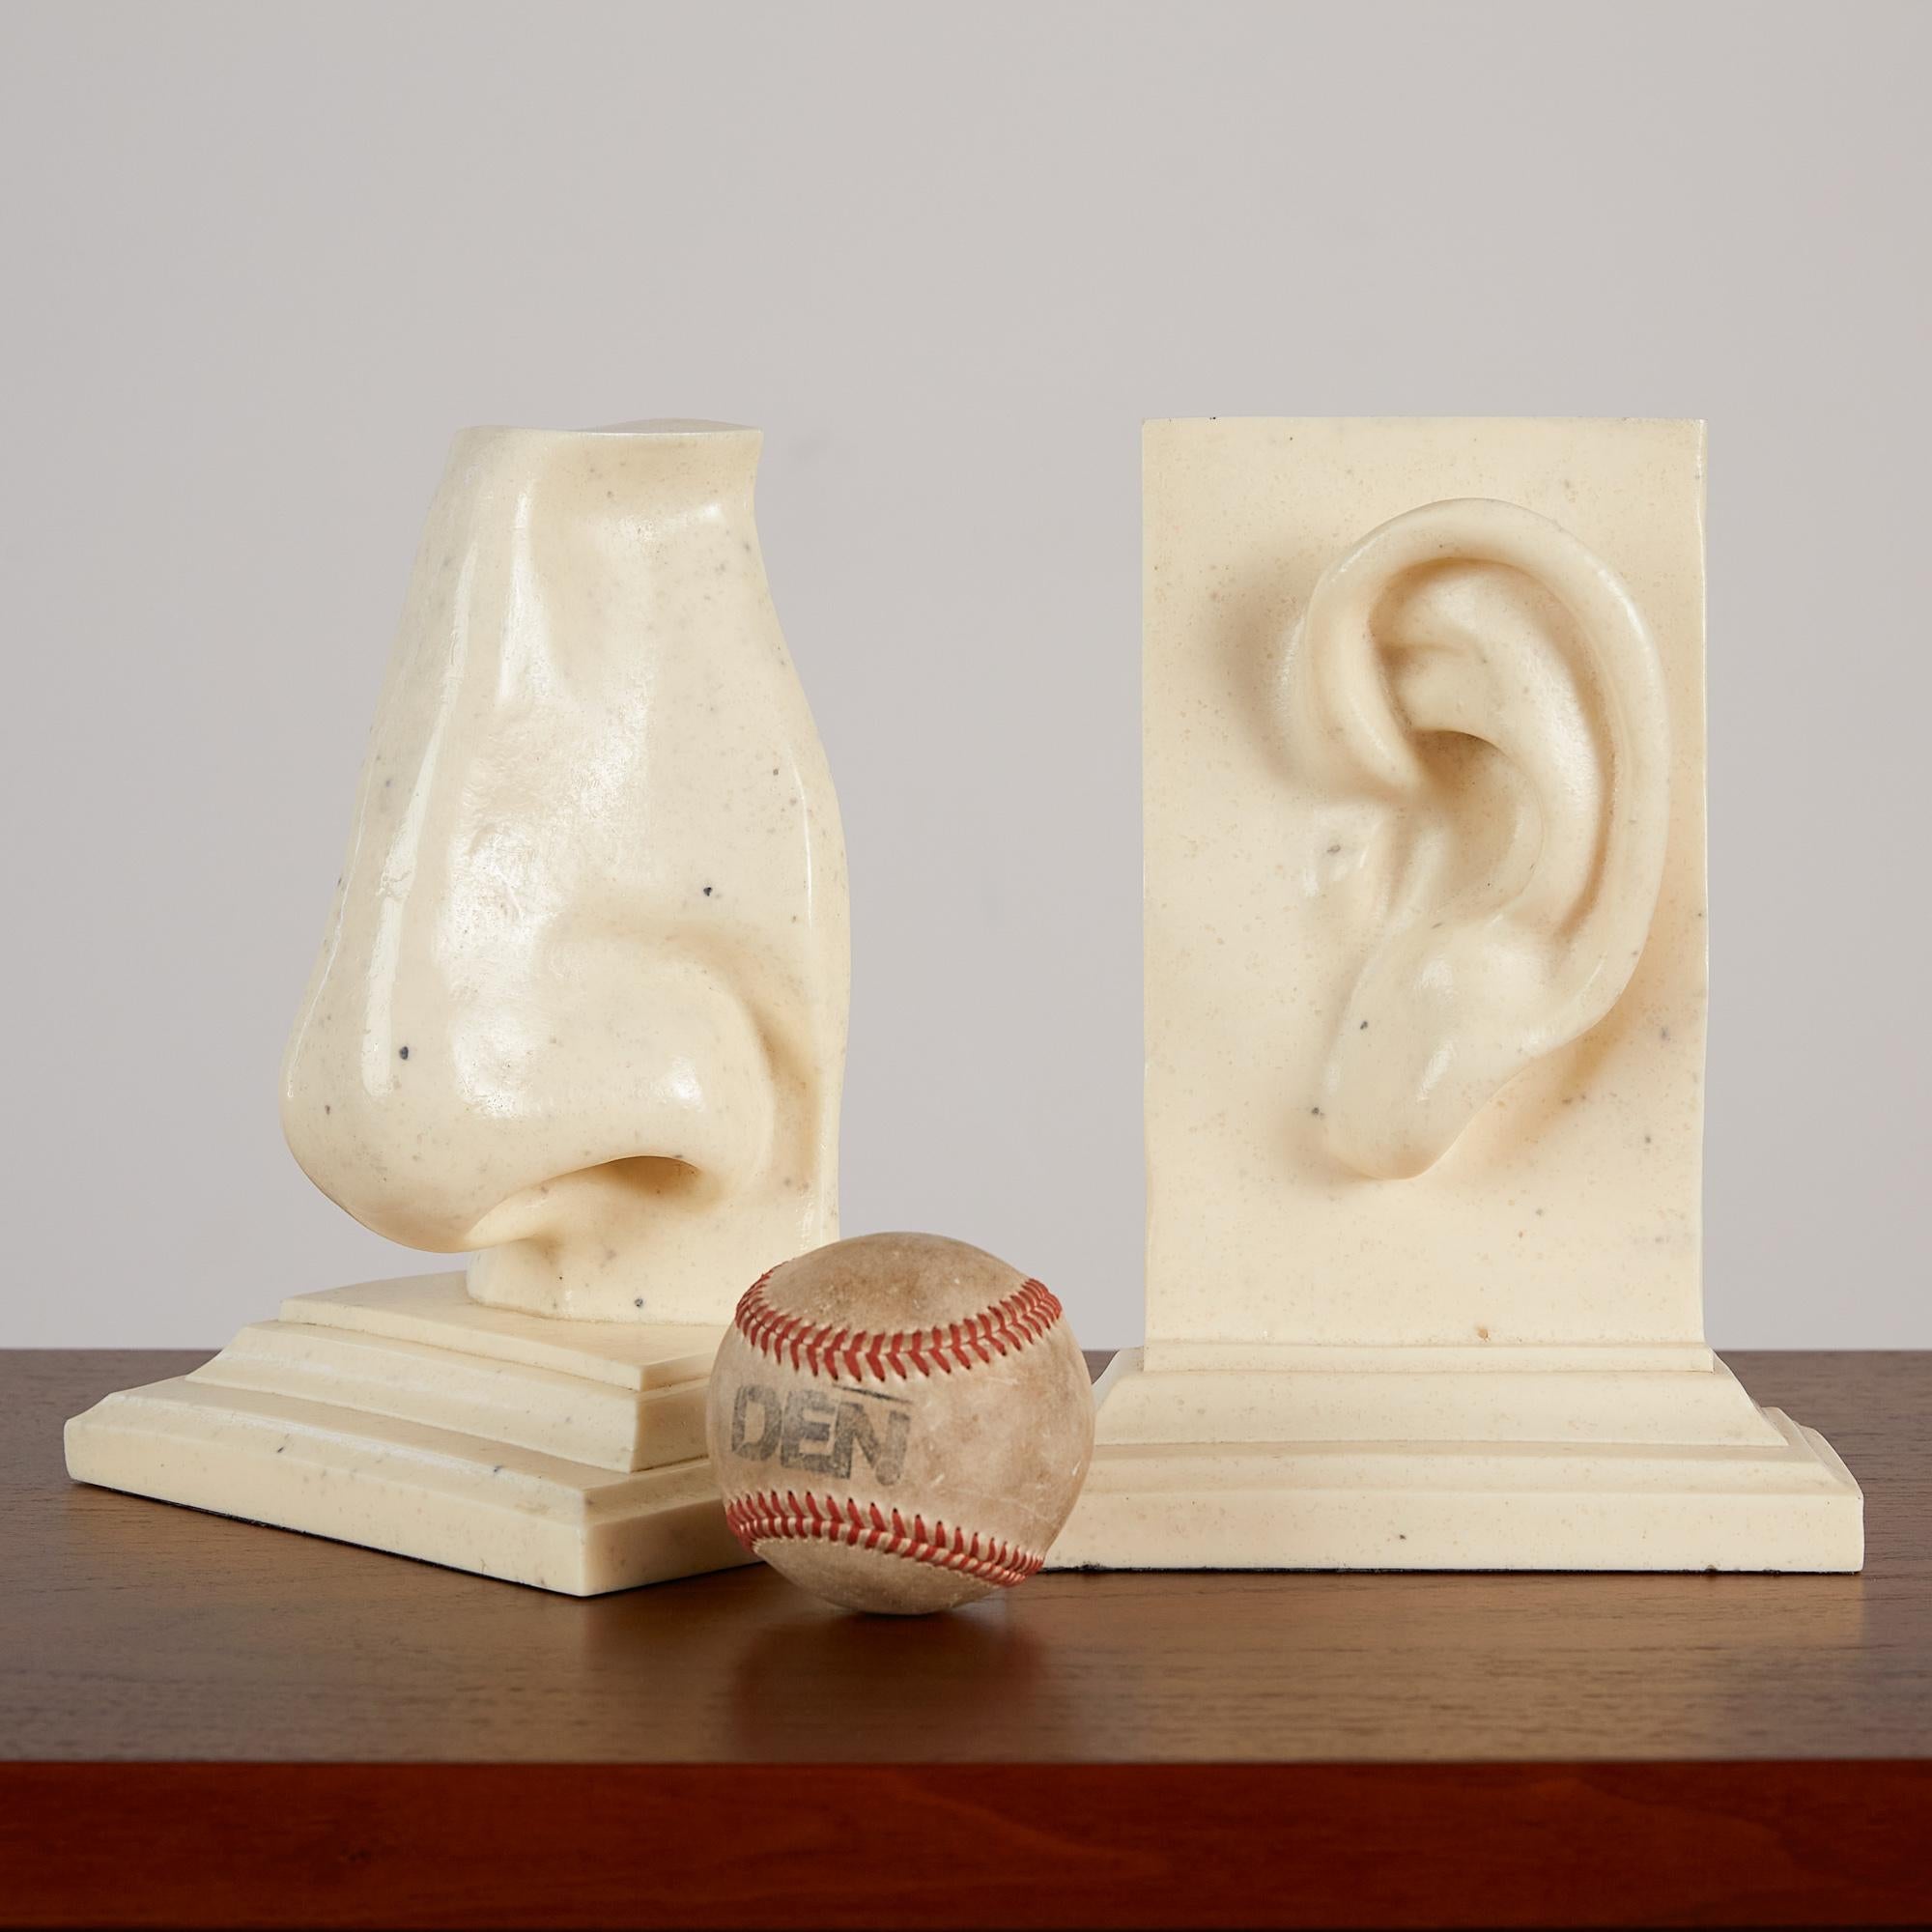 A resin composite ear and nose bookend set by C2C Designs, c. 1980s. These playful bookends have the look of alabaster. Perhaps they remind you of something out of a museum? They are replicas of Michelangelo's nose and ear. The perfect quirky